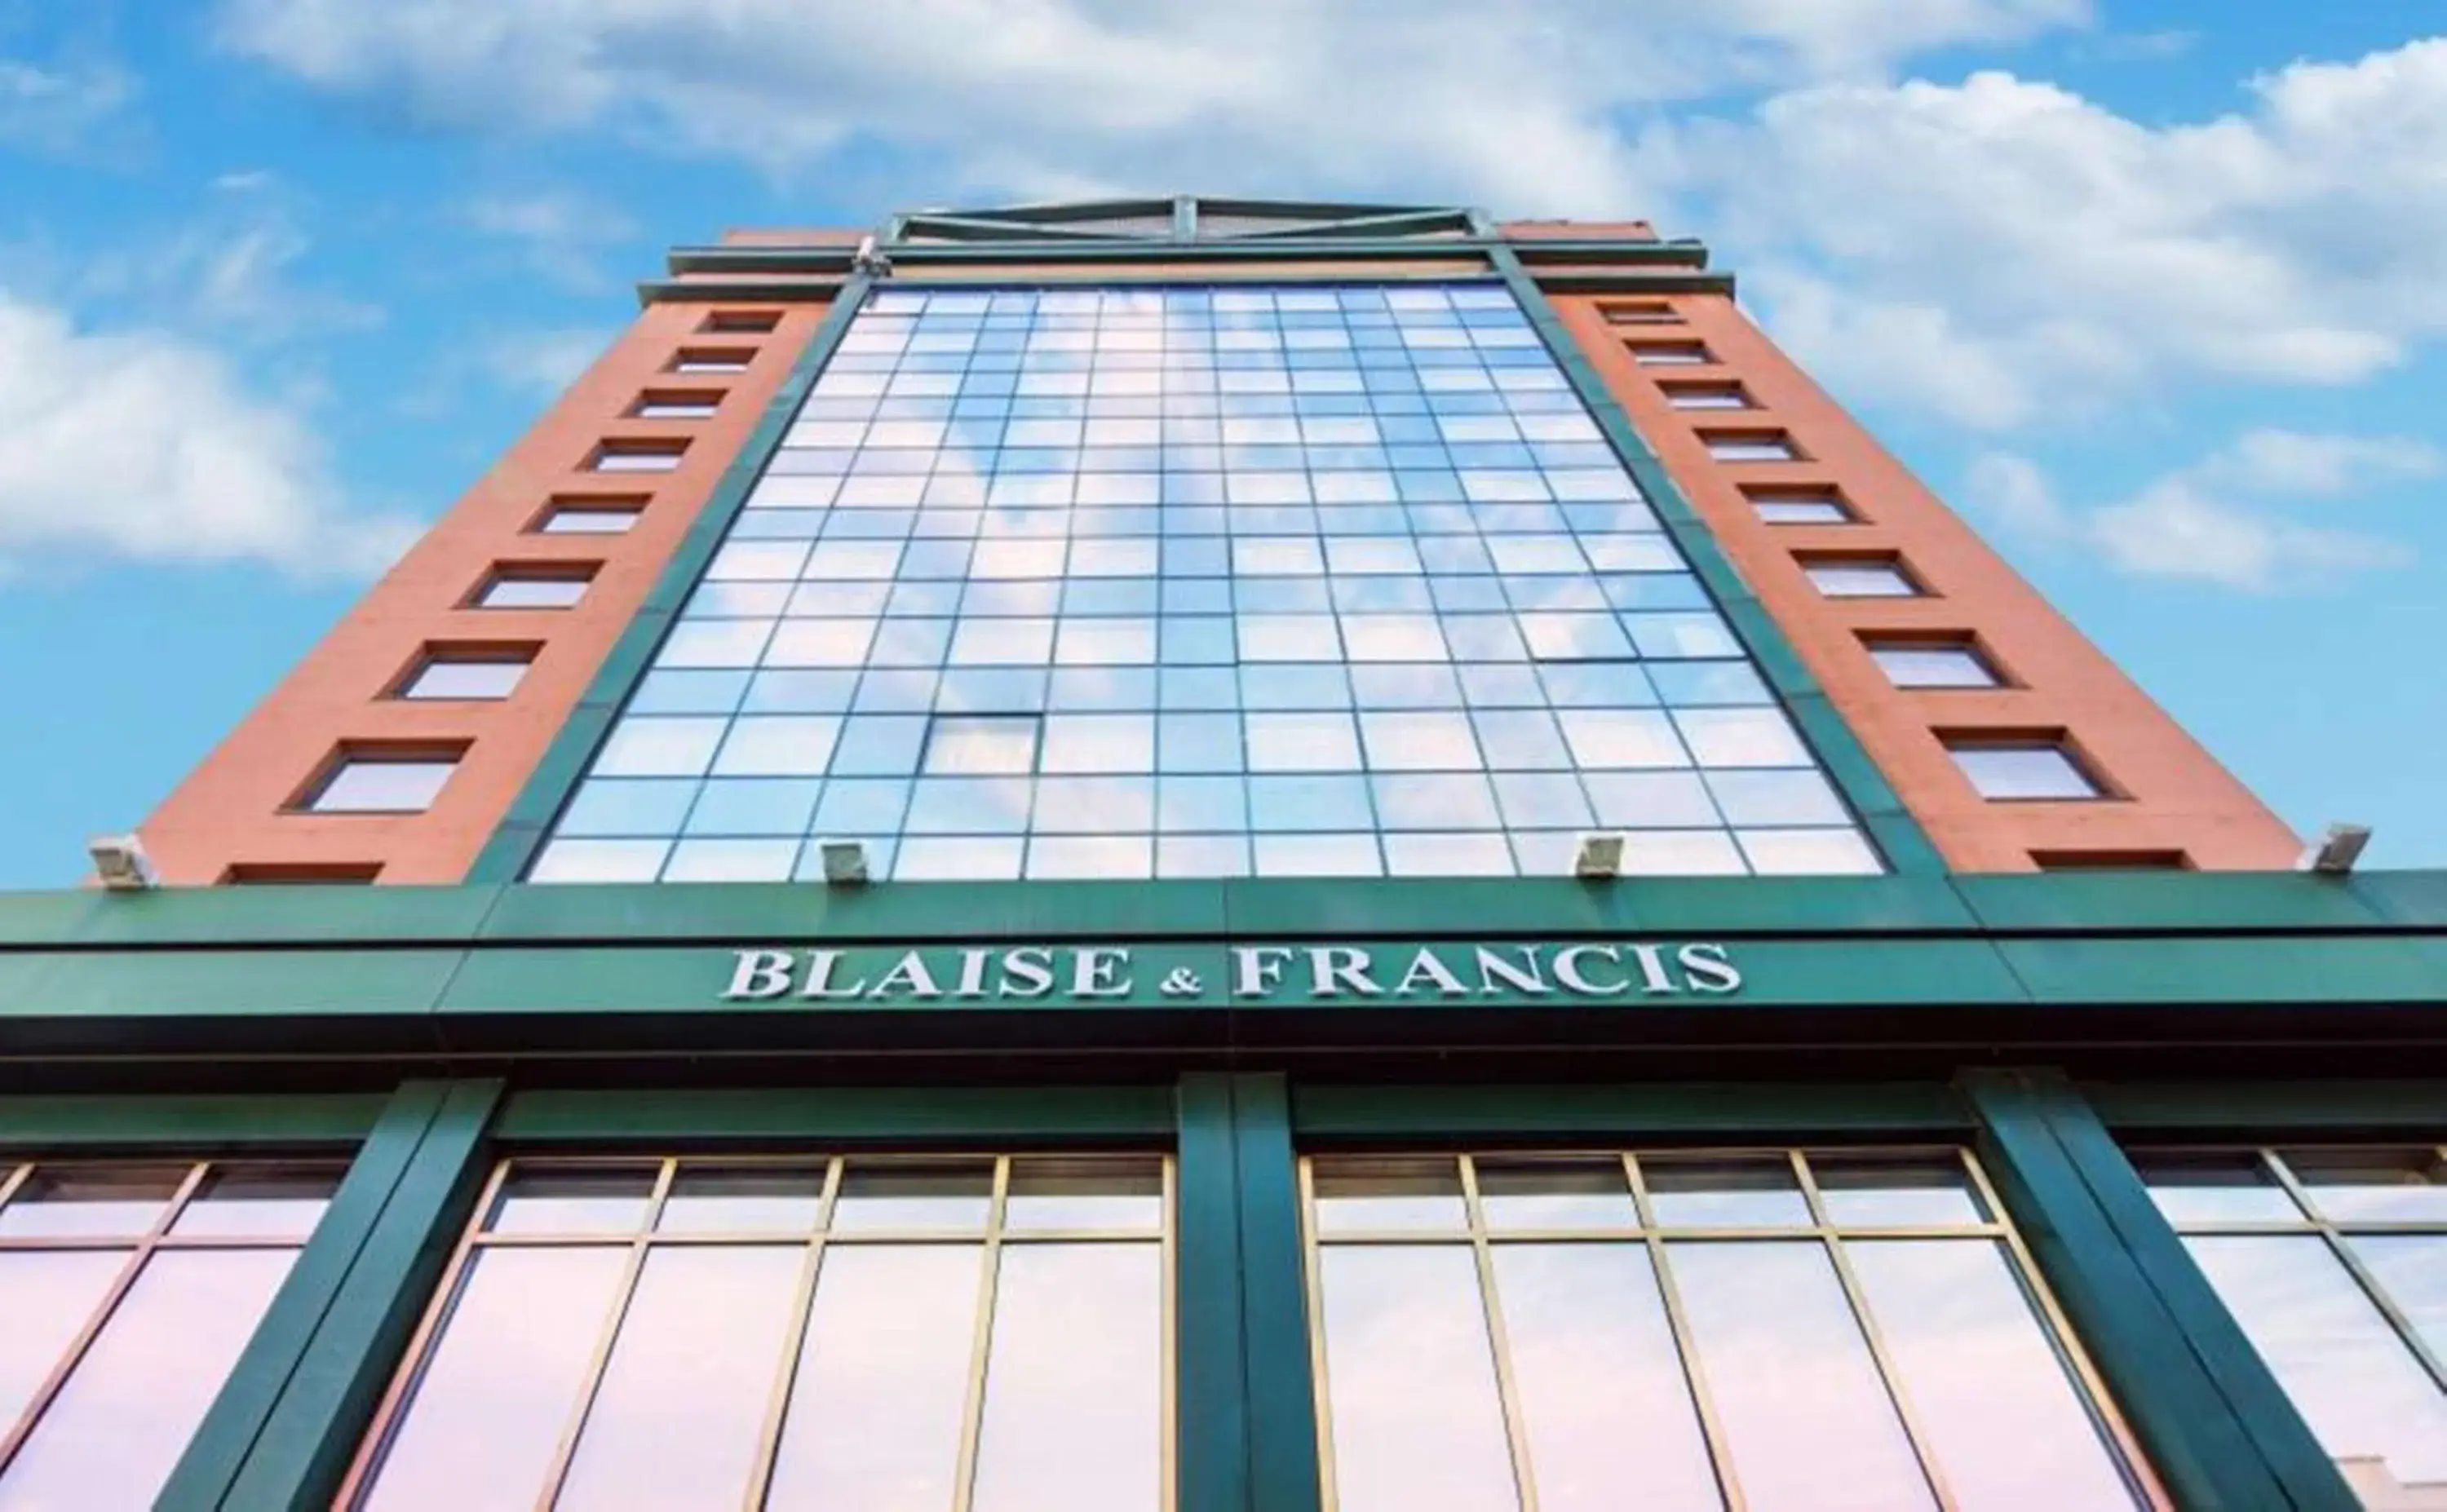 Property building in Hotel Blaise & Francis